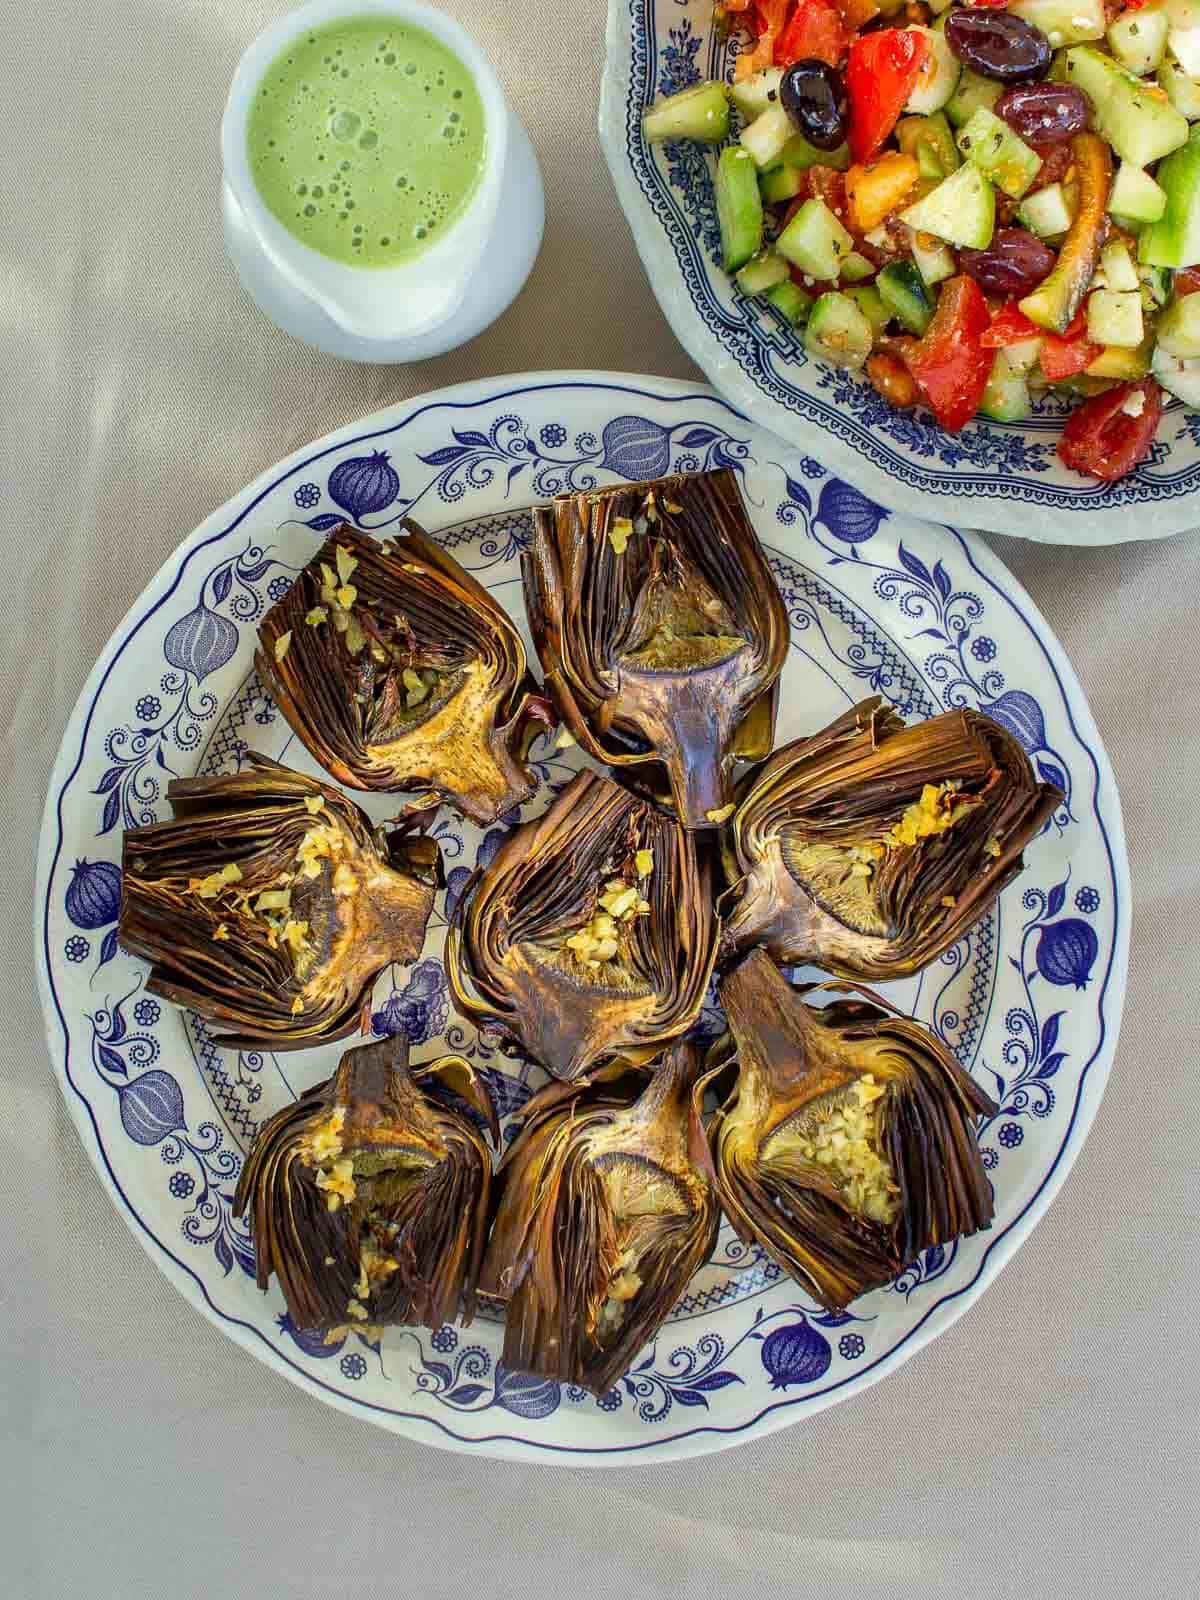 artichokes with dipping sauce for a vegan spring appetizer